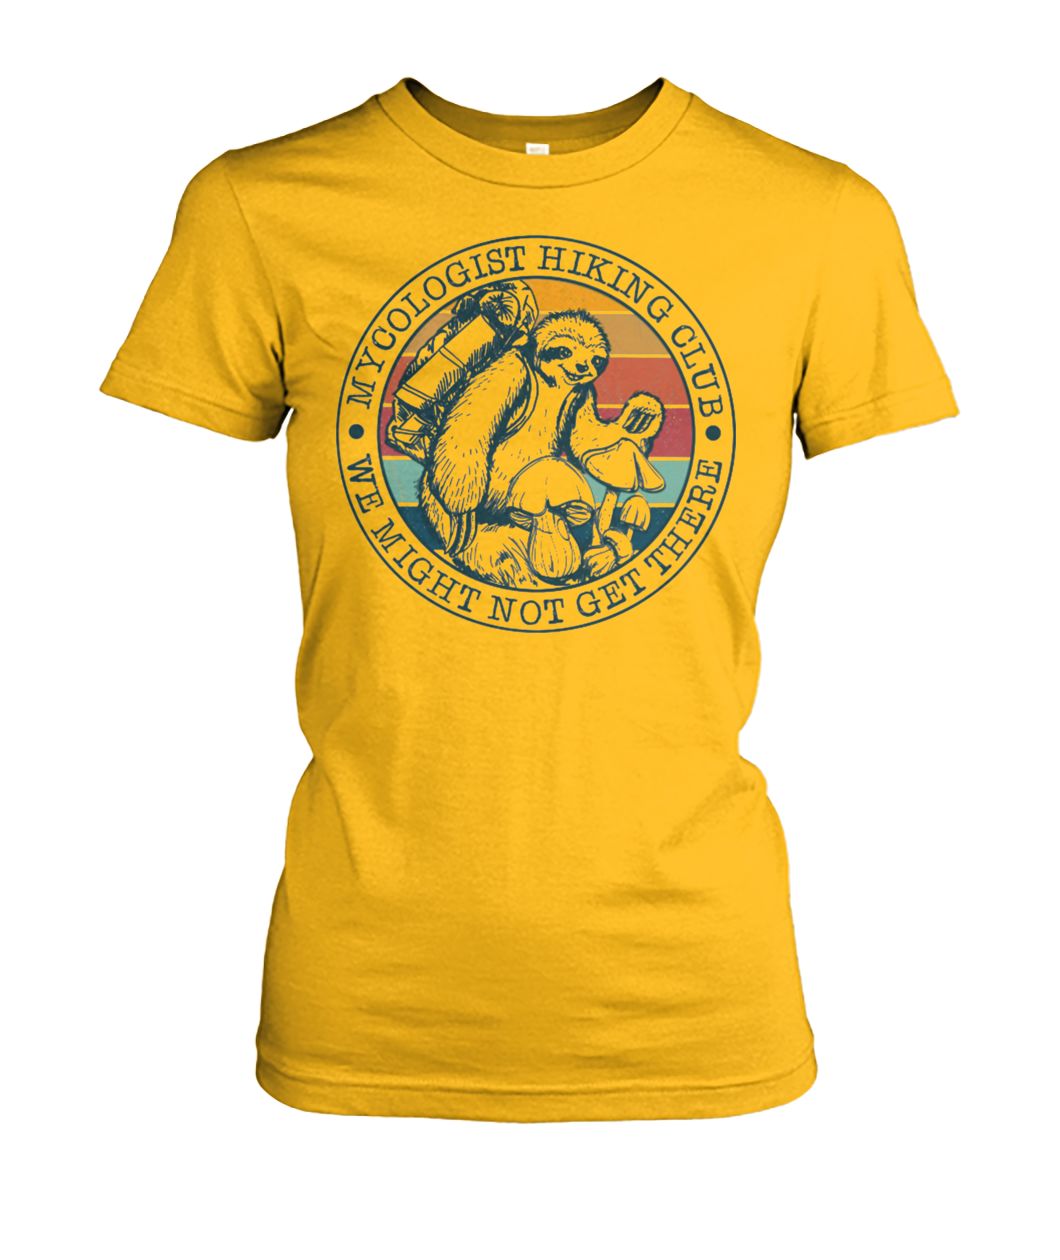 Mycologist hiking club we might not get there sloth women's crew tee